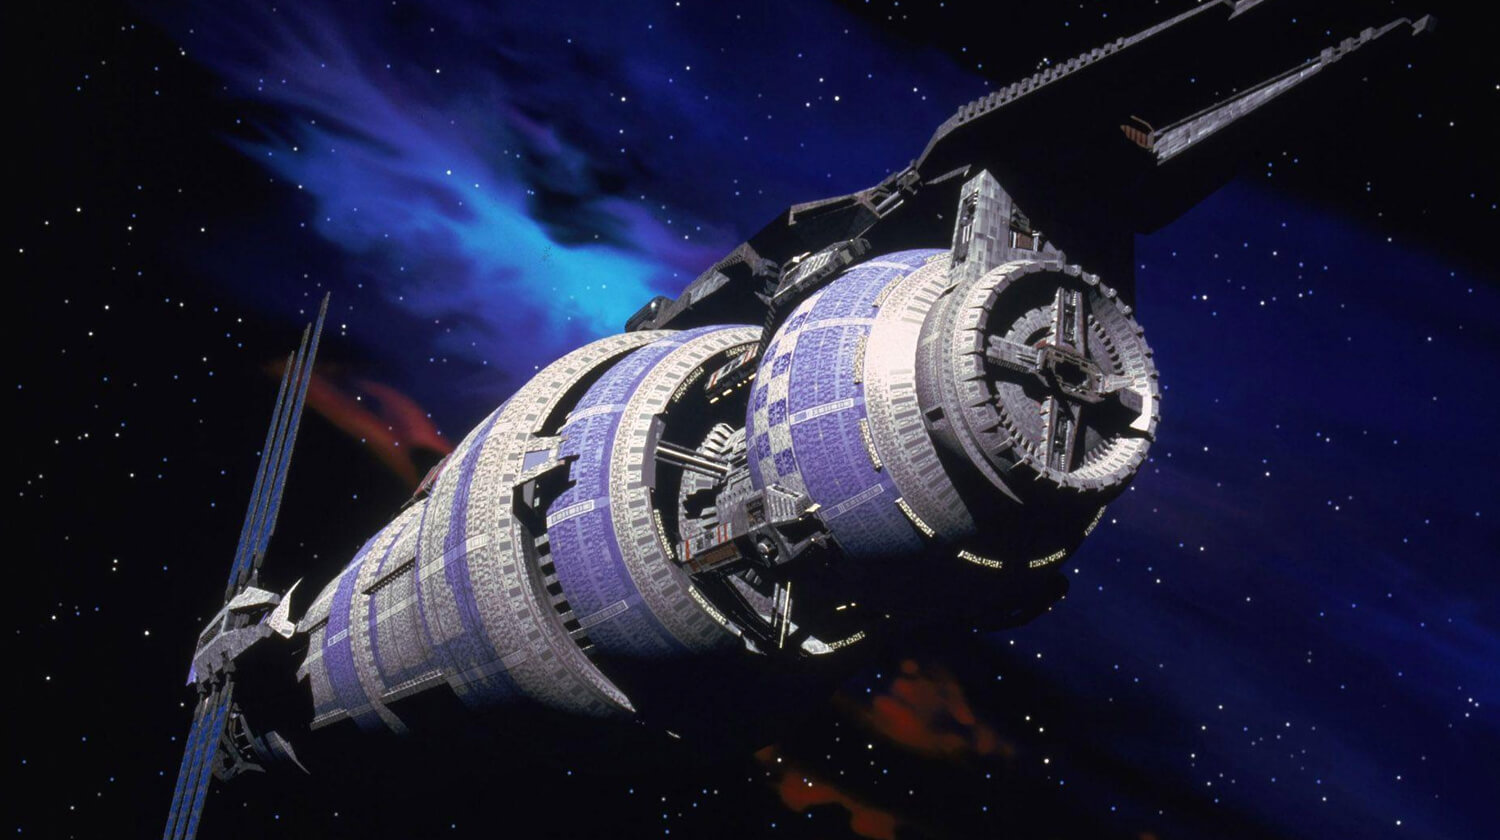 Babylon 5 space station from original series